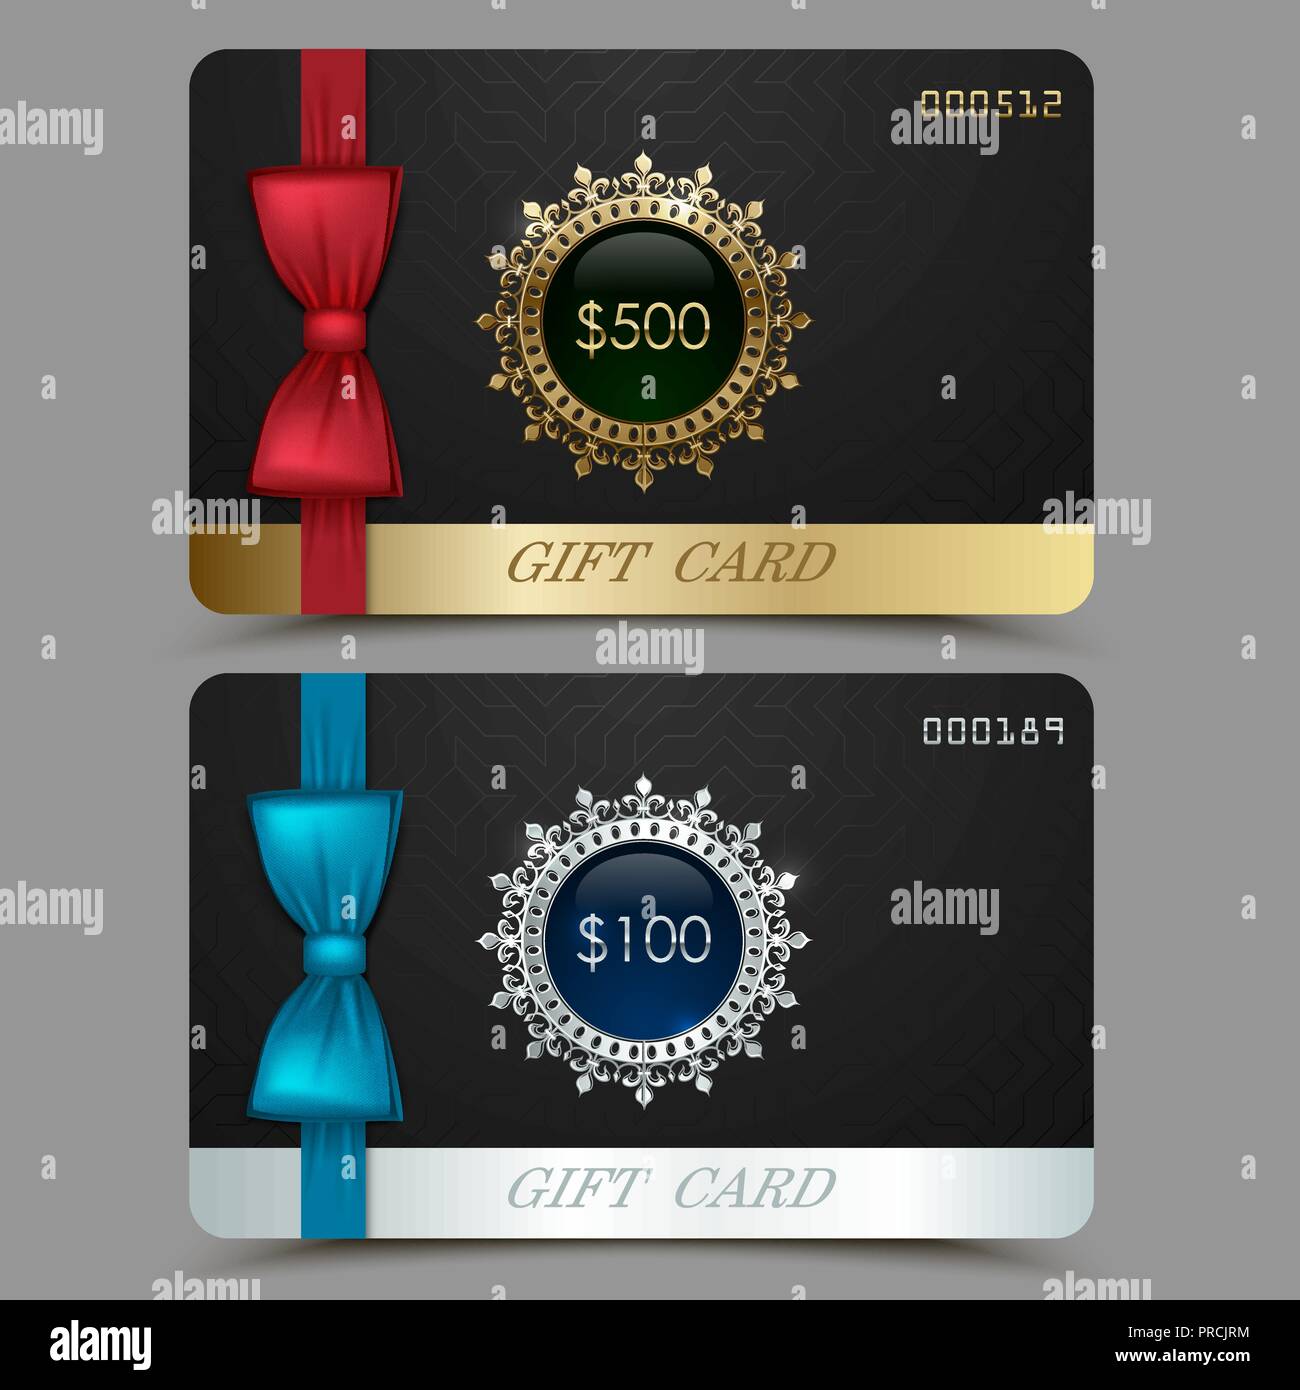 Gift voucher templates. Set of discount certificates. Vector illustration of coupons with 100 dollars value. Premium promotional card with red bow Stock Vector